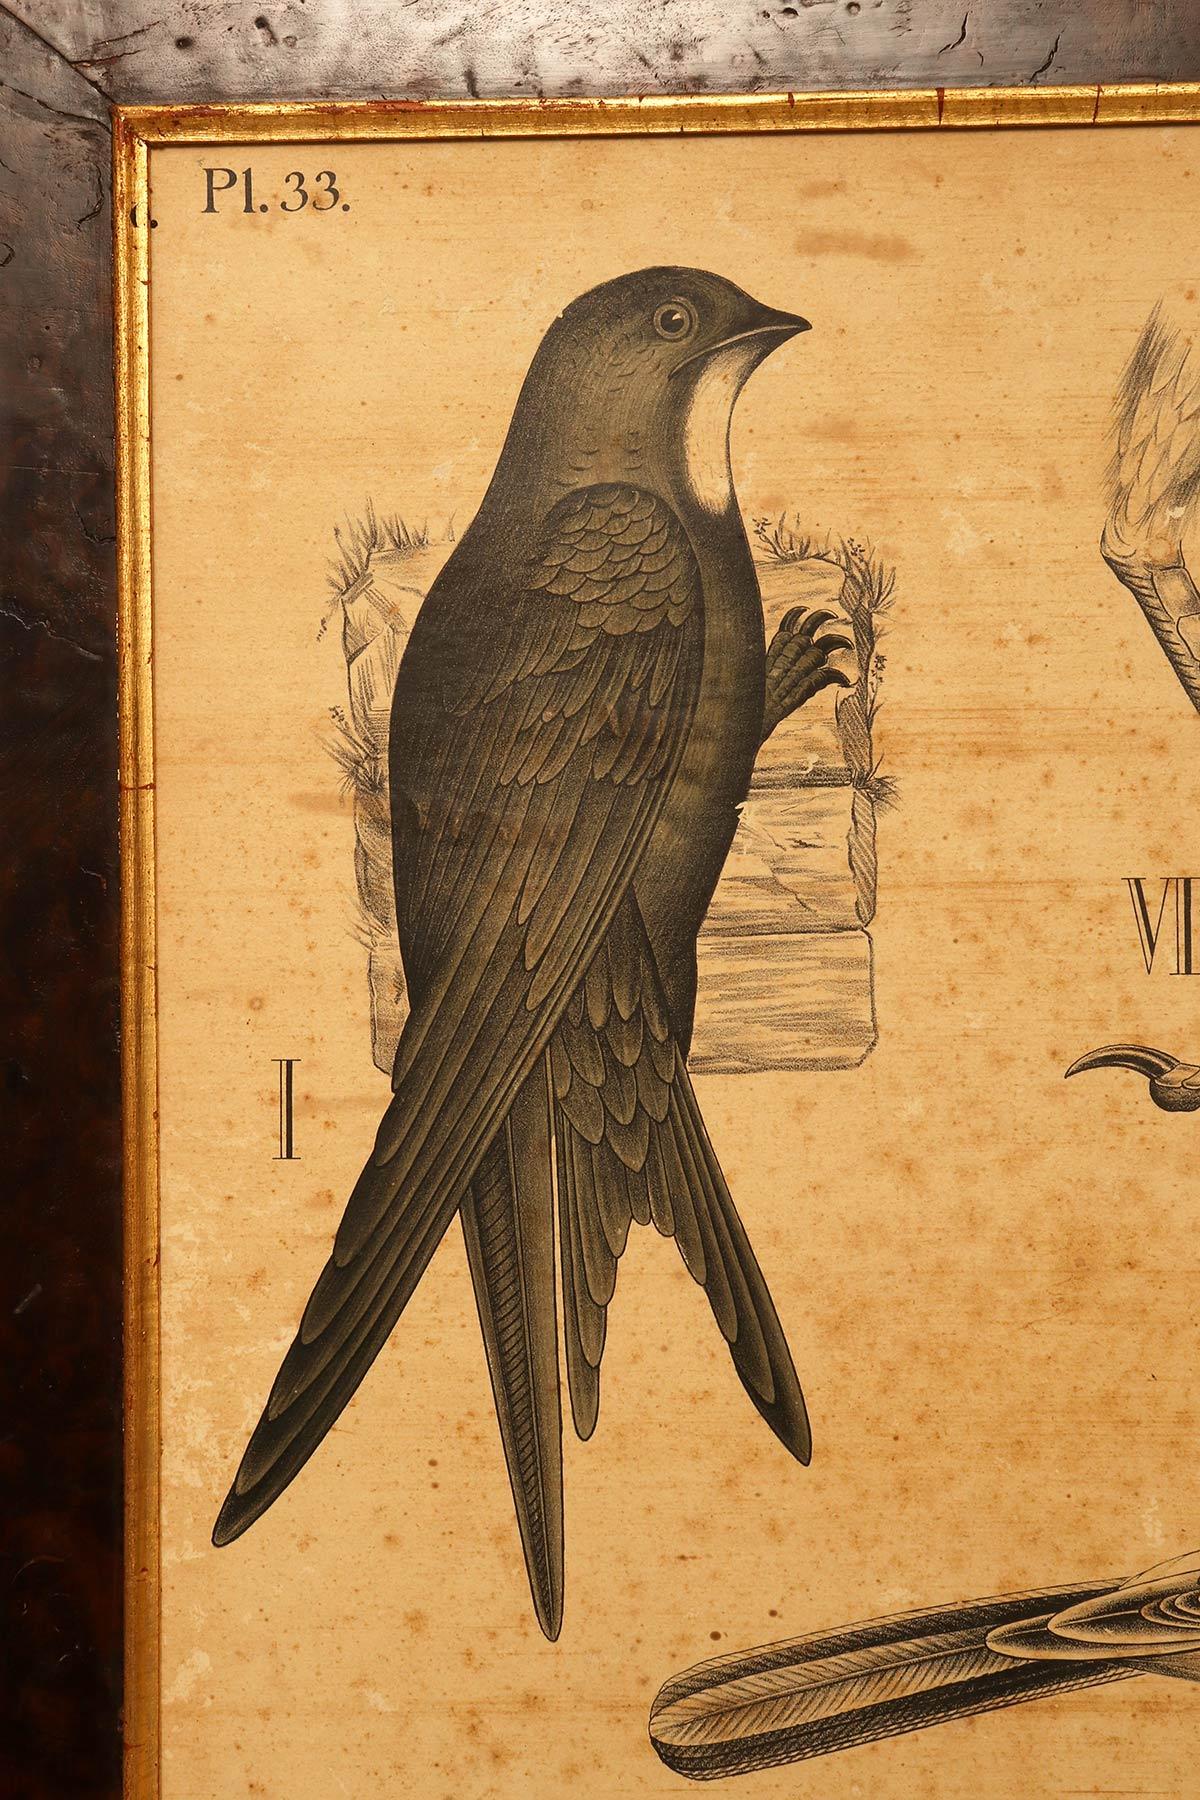 A chromolithographic print on paper by P. Dybdahls, depicting an anatomical table (Pl. 33) of birds. Fir wood frame, walnut briar veneer, with gilded ramin wood edge. H. Aschehoug & co, P.M. Bye & co. Oslo, Norway, late 19th century.